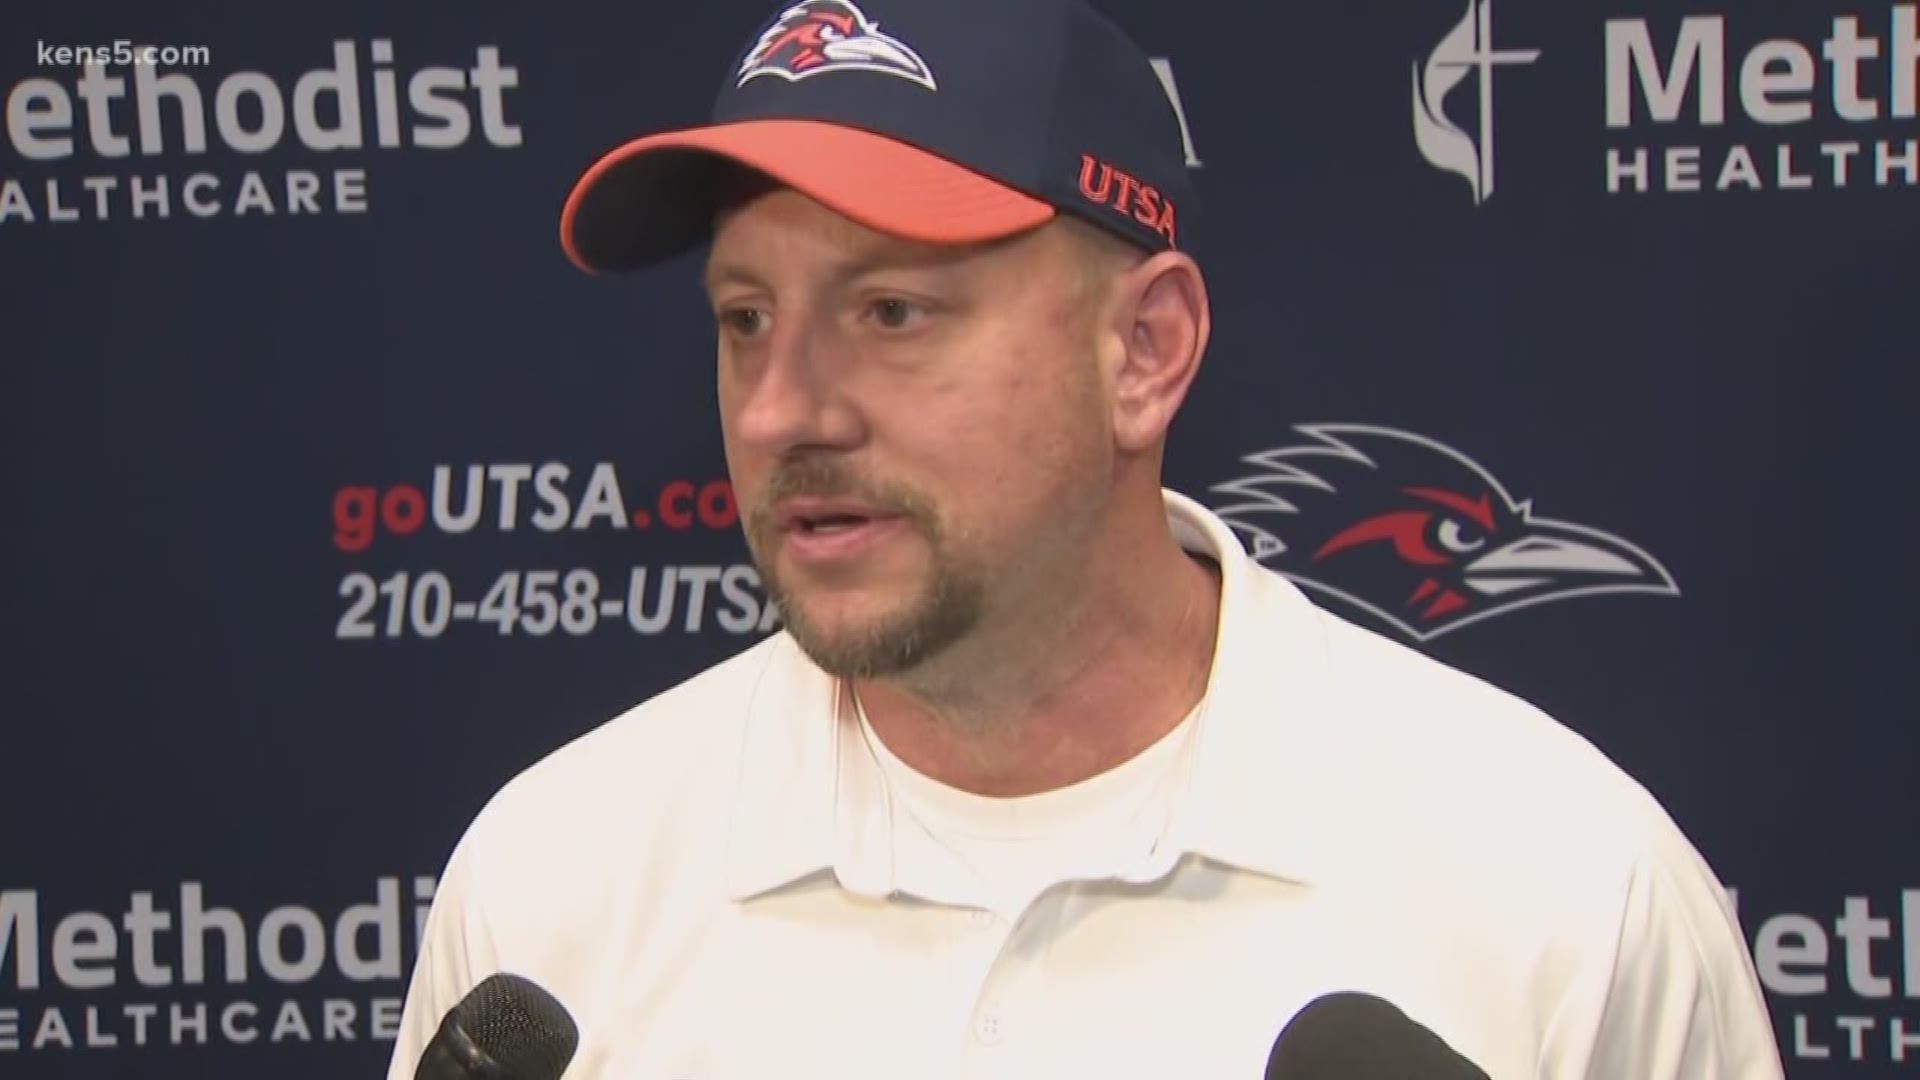 Jeff Traylor is confident he's got a motivated UTSA squad as spring practice begins.